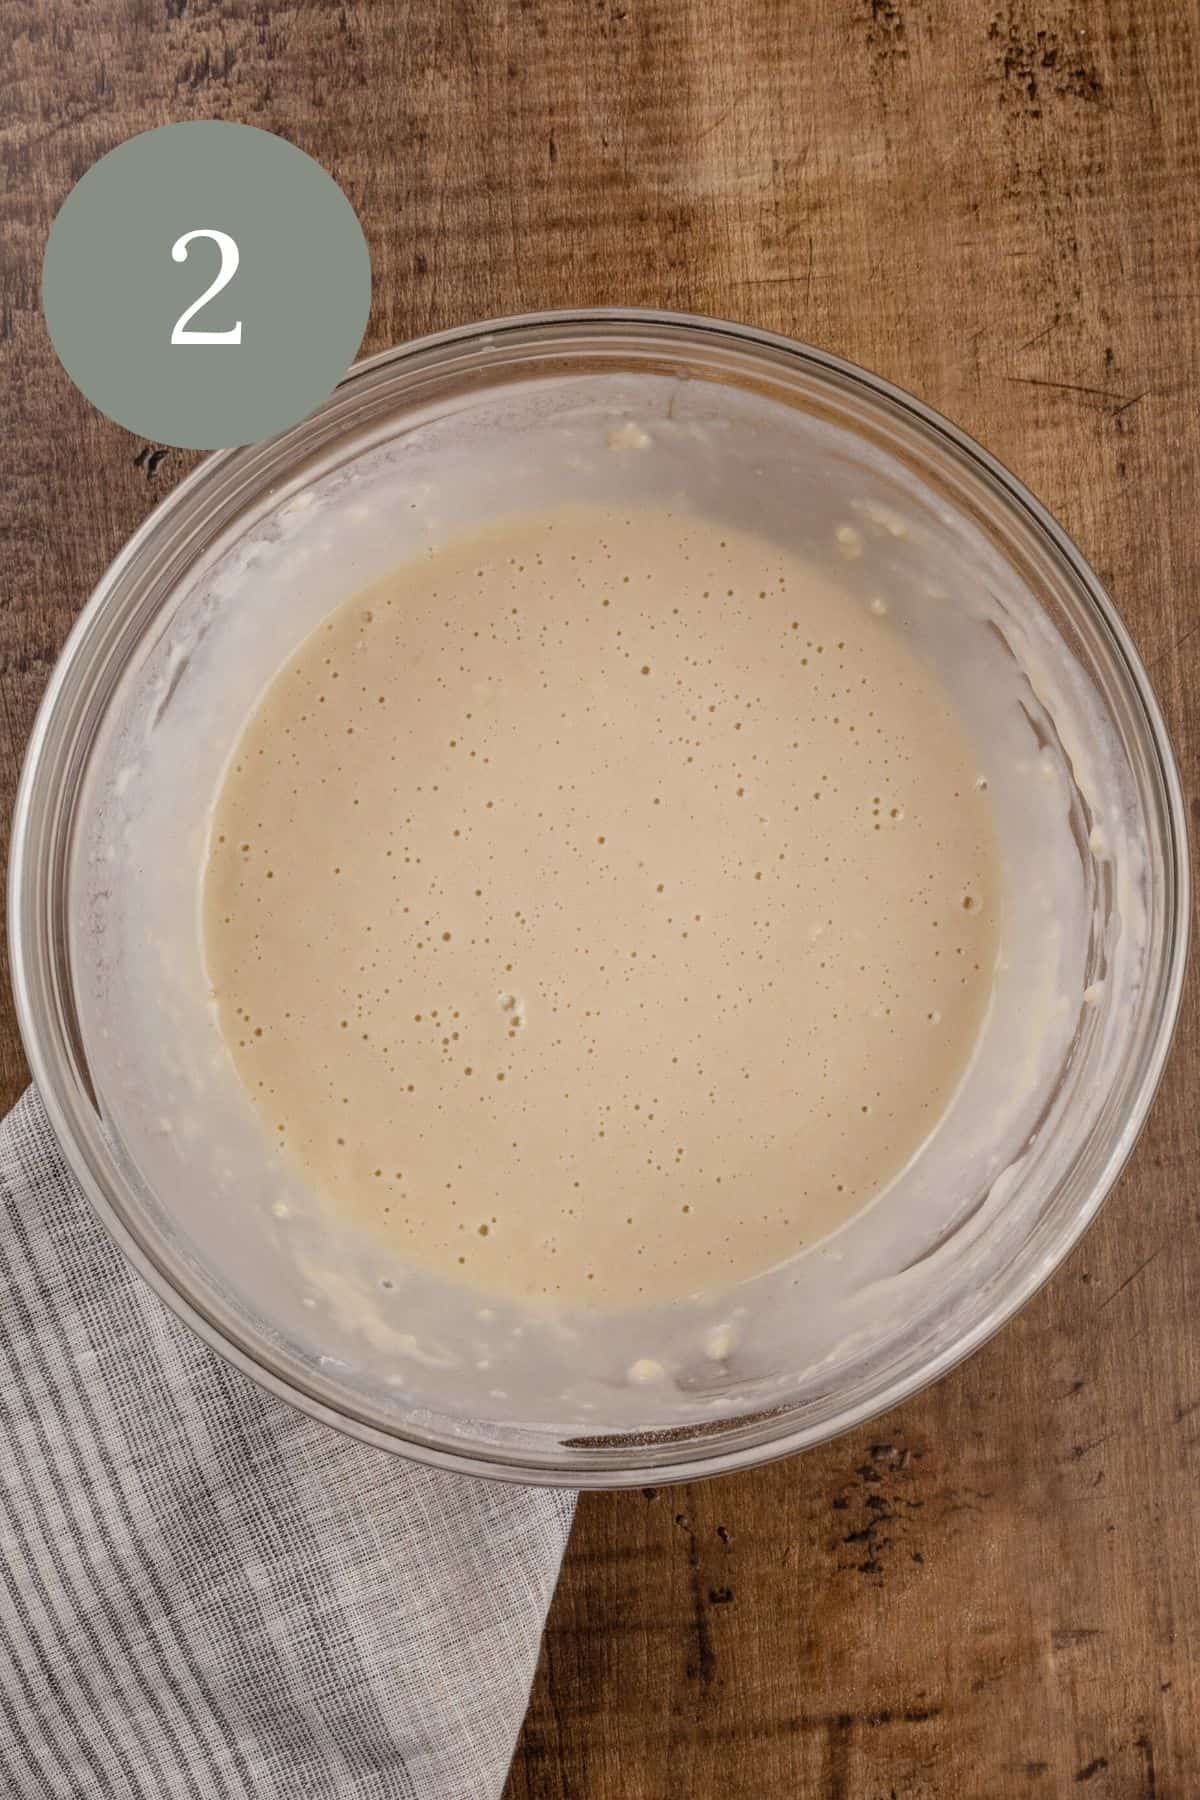 the finished pancake batter in a glass bowl on the wood tabletop. a gray and white stripe towel is under the bowl. a round green circle with the number two is in the top left corner.